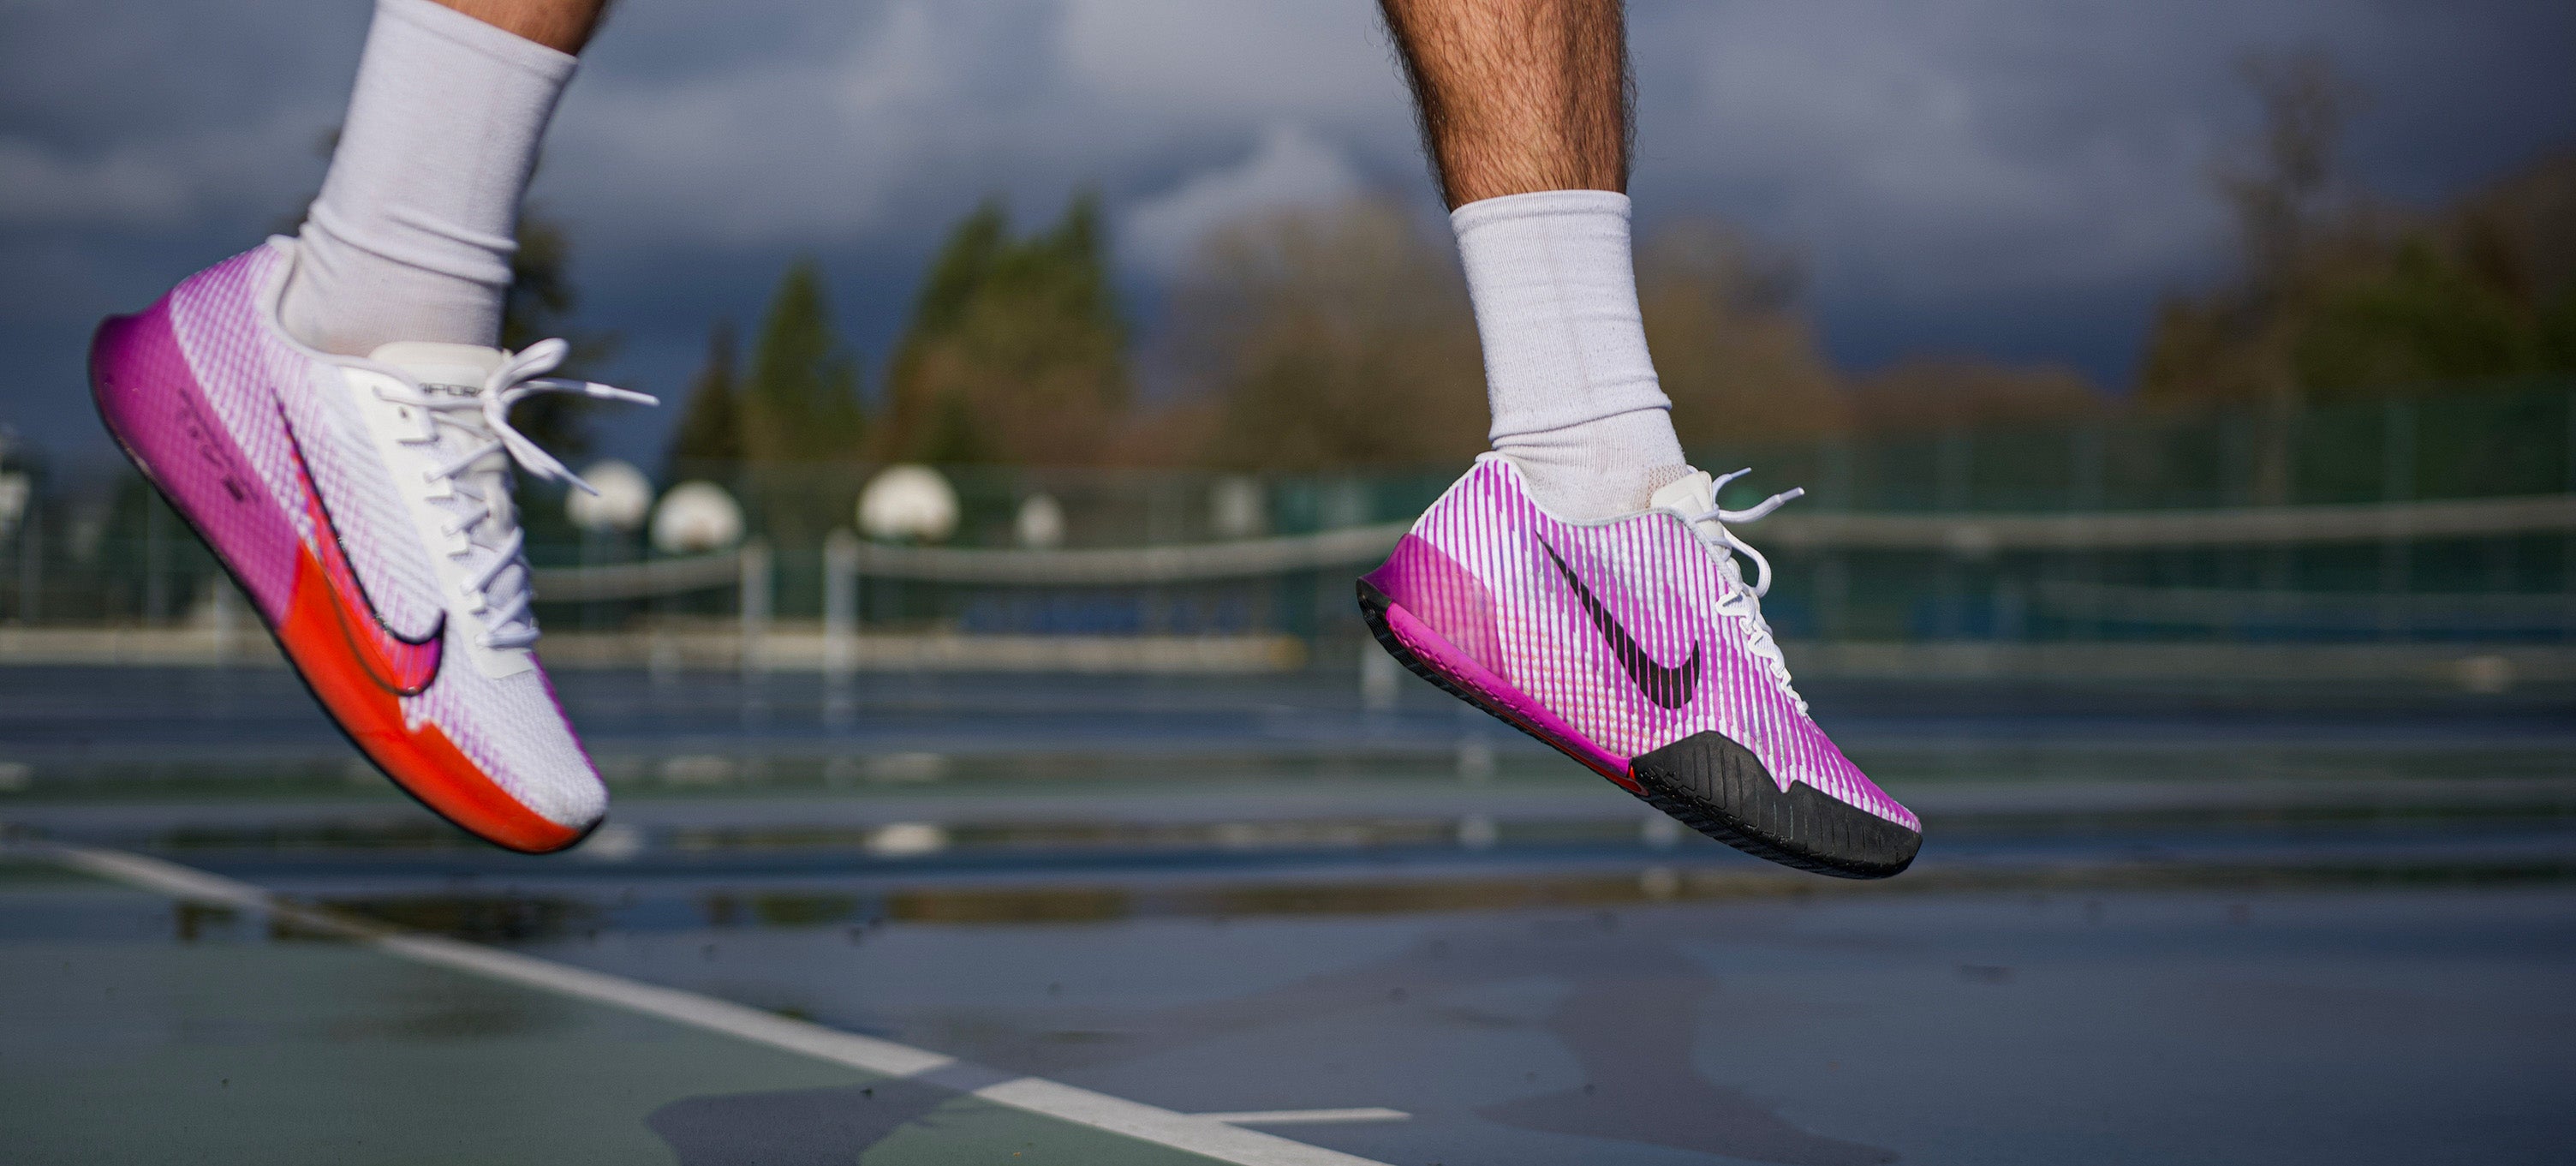 Nike 11 Court Review | Rackets Runners